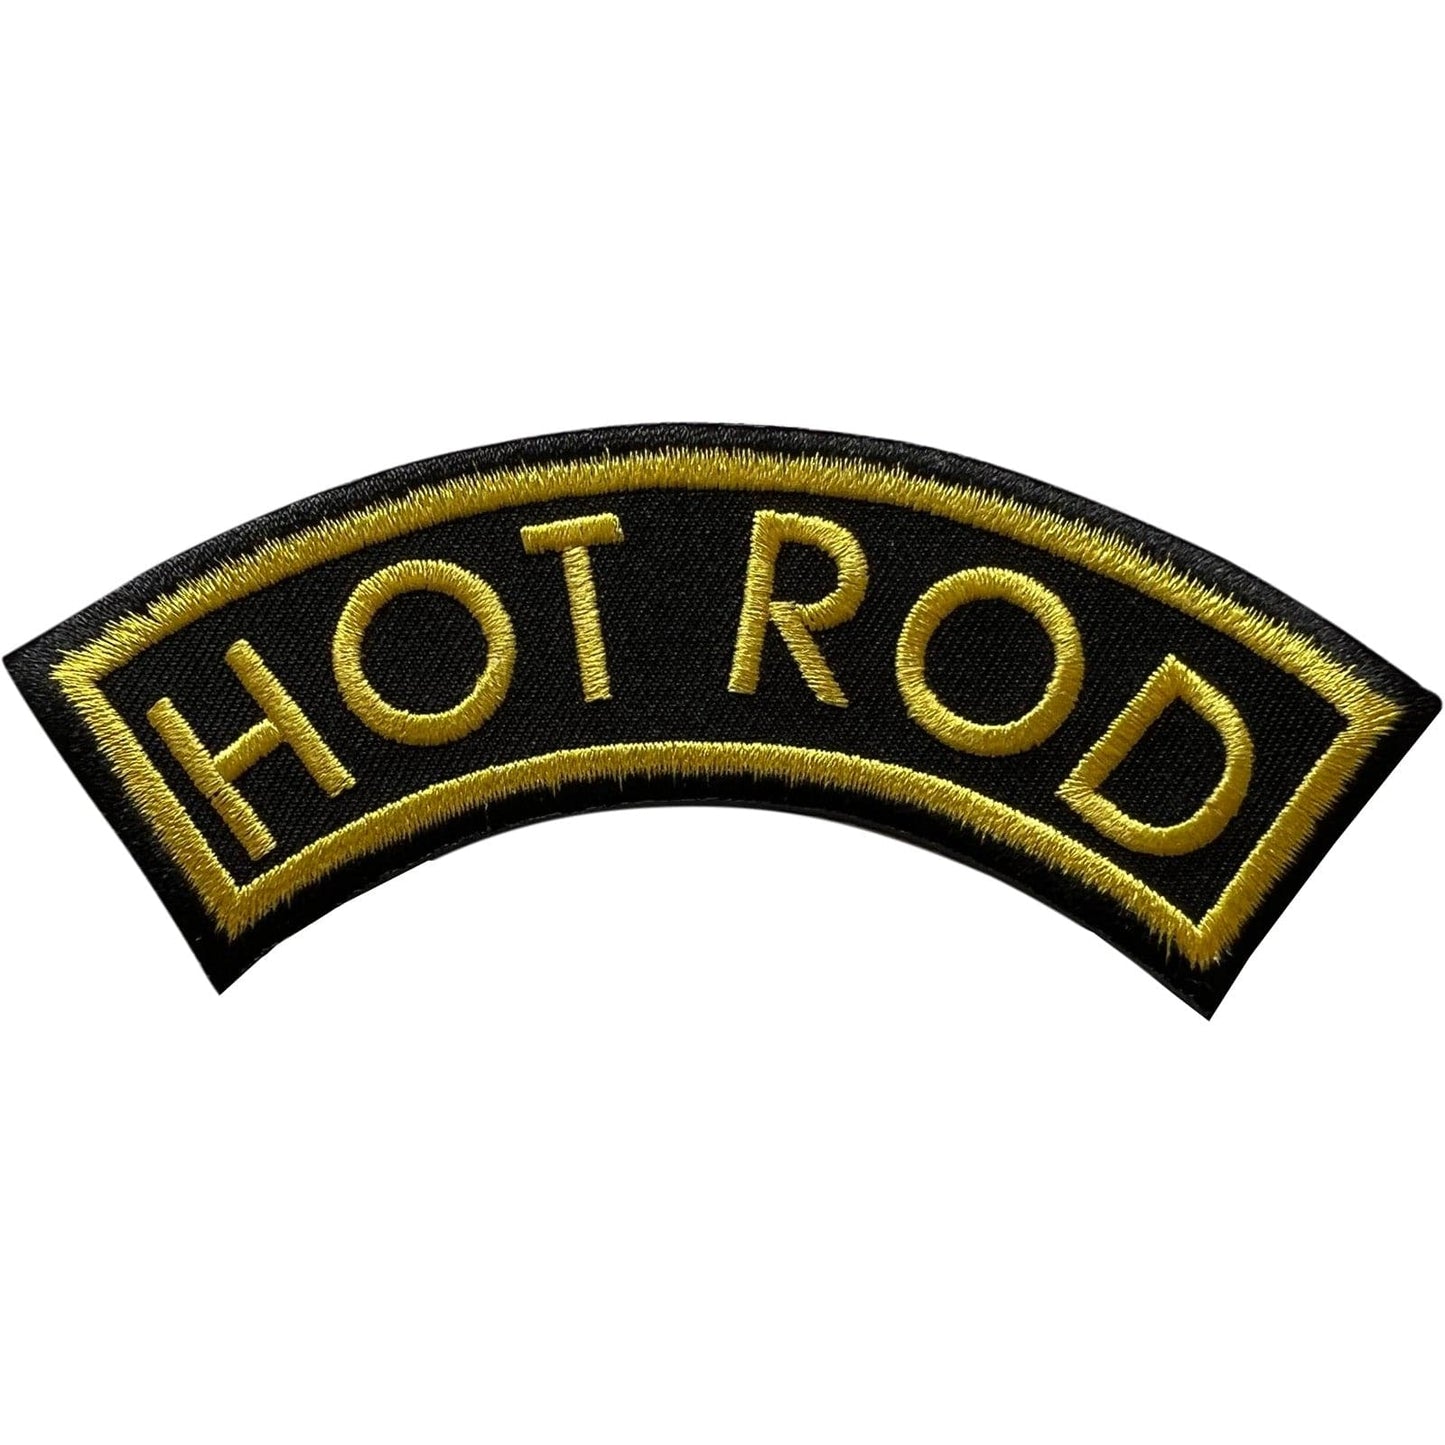 HOT ROD Patch Iron Sew On Clothes Bag Hat Denim Fabric Embroidery Badge Applique